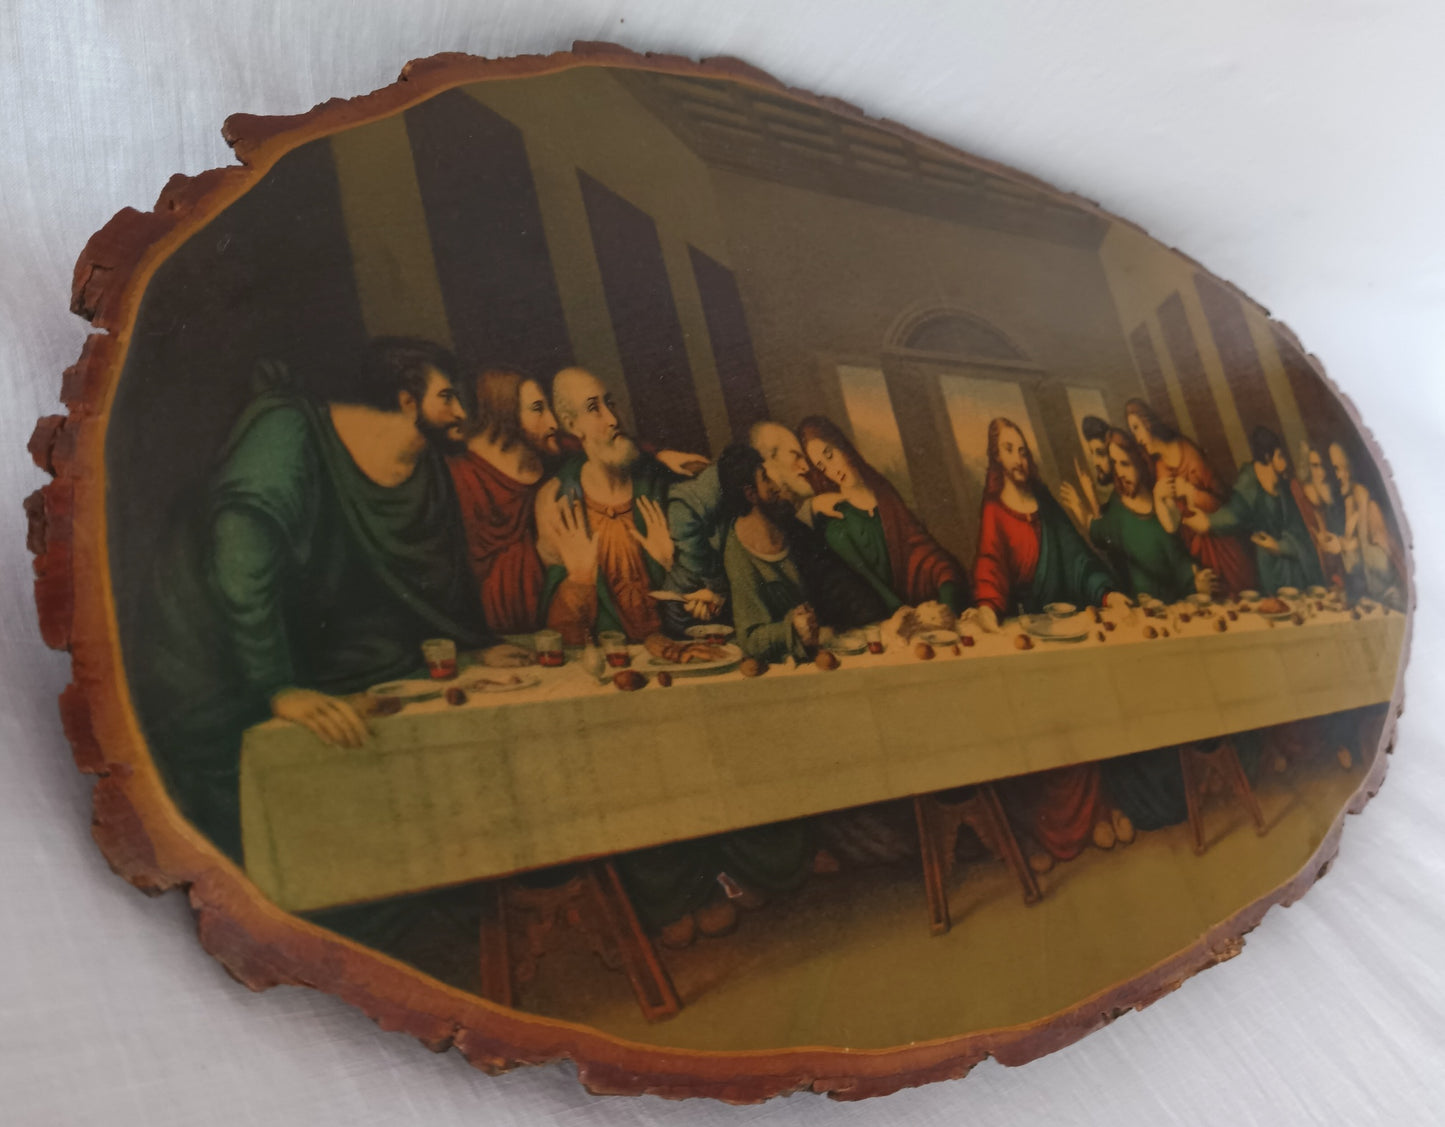 Vintage Last Supper Decoupage Picture Oval Wood Slice Slab Large Plaque Wall Hanging Jesus Apostles Souvenir Franciscan Monastery Religious Gift